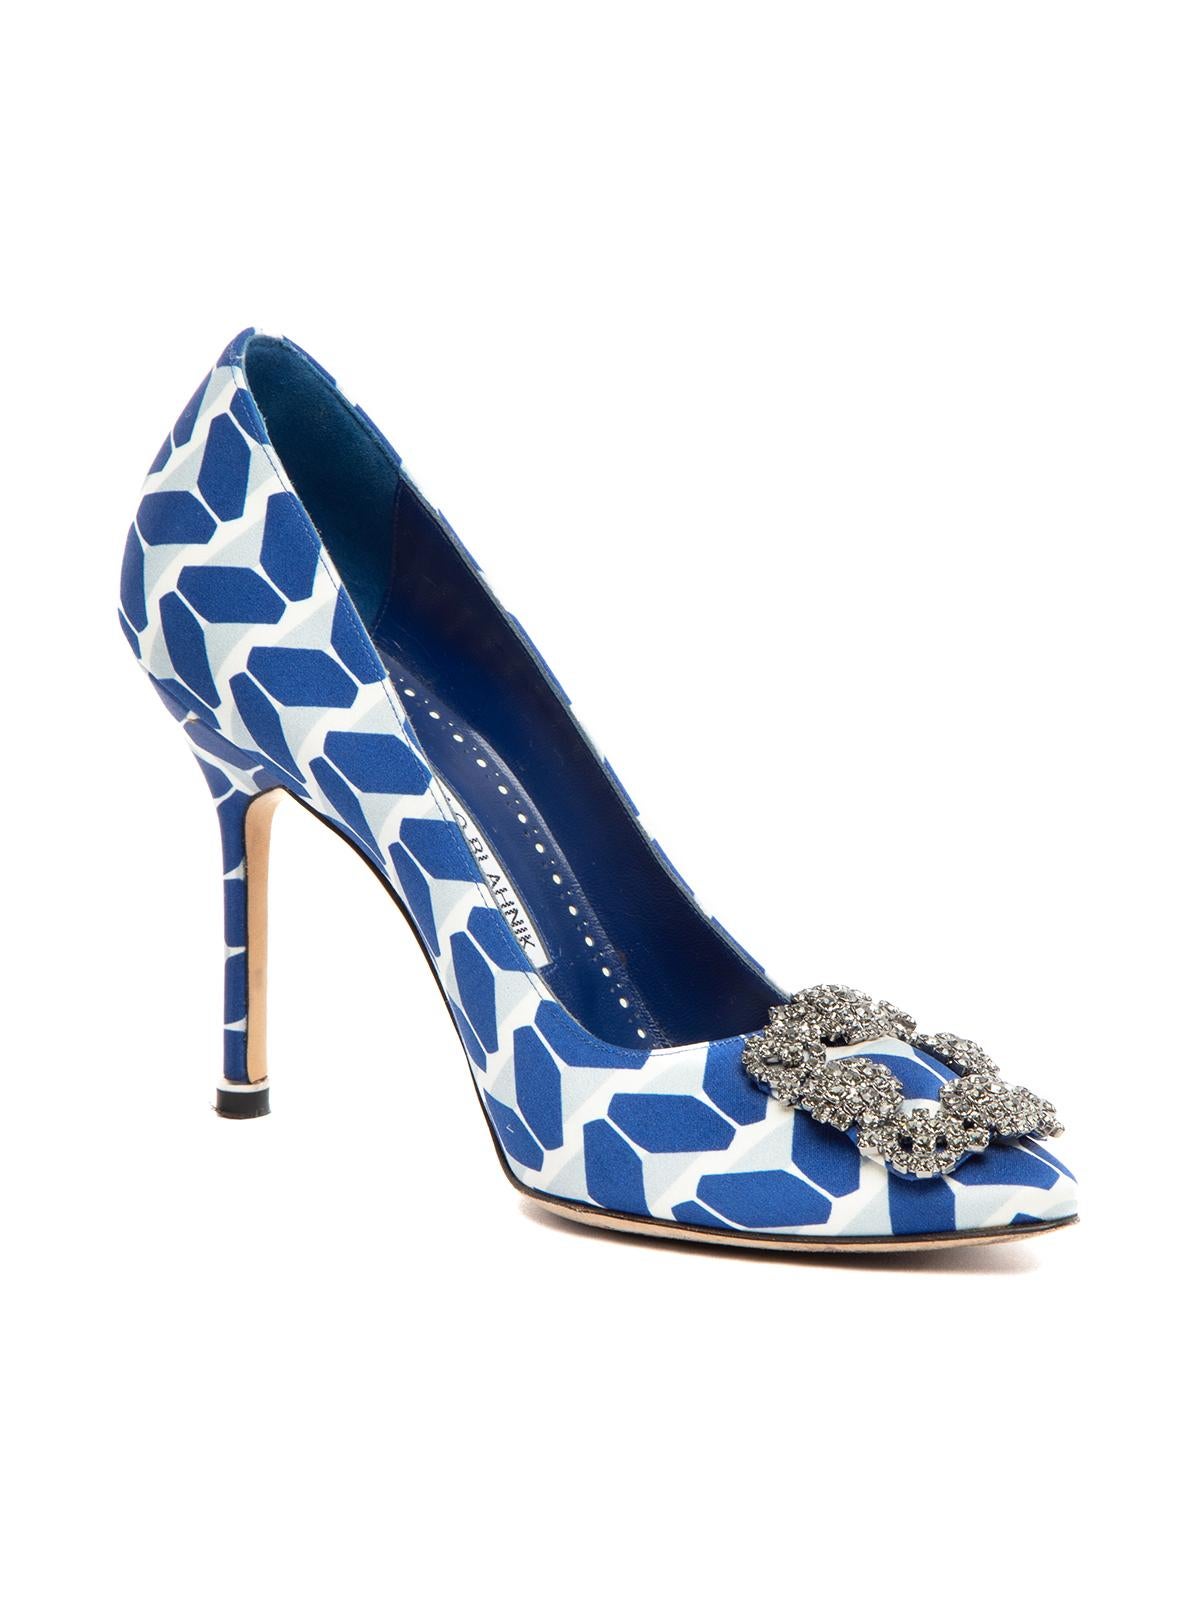 CONDITION is Very good. Minimal wear to heels is evident. Minimal wear to outsole and heel point on this used Manolo Blahnik designer resale item. Details: Hangisi Blue/ White Satin Stiletto Almond toe Embellished accessory on front Leather insoles